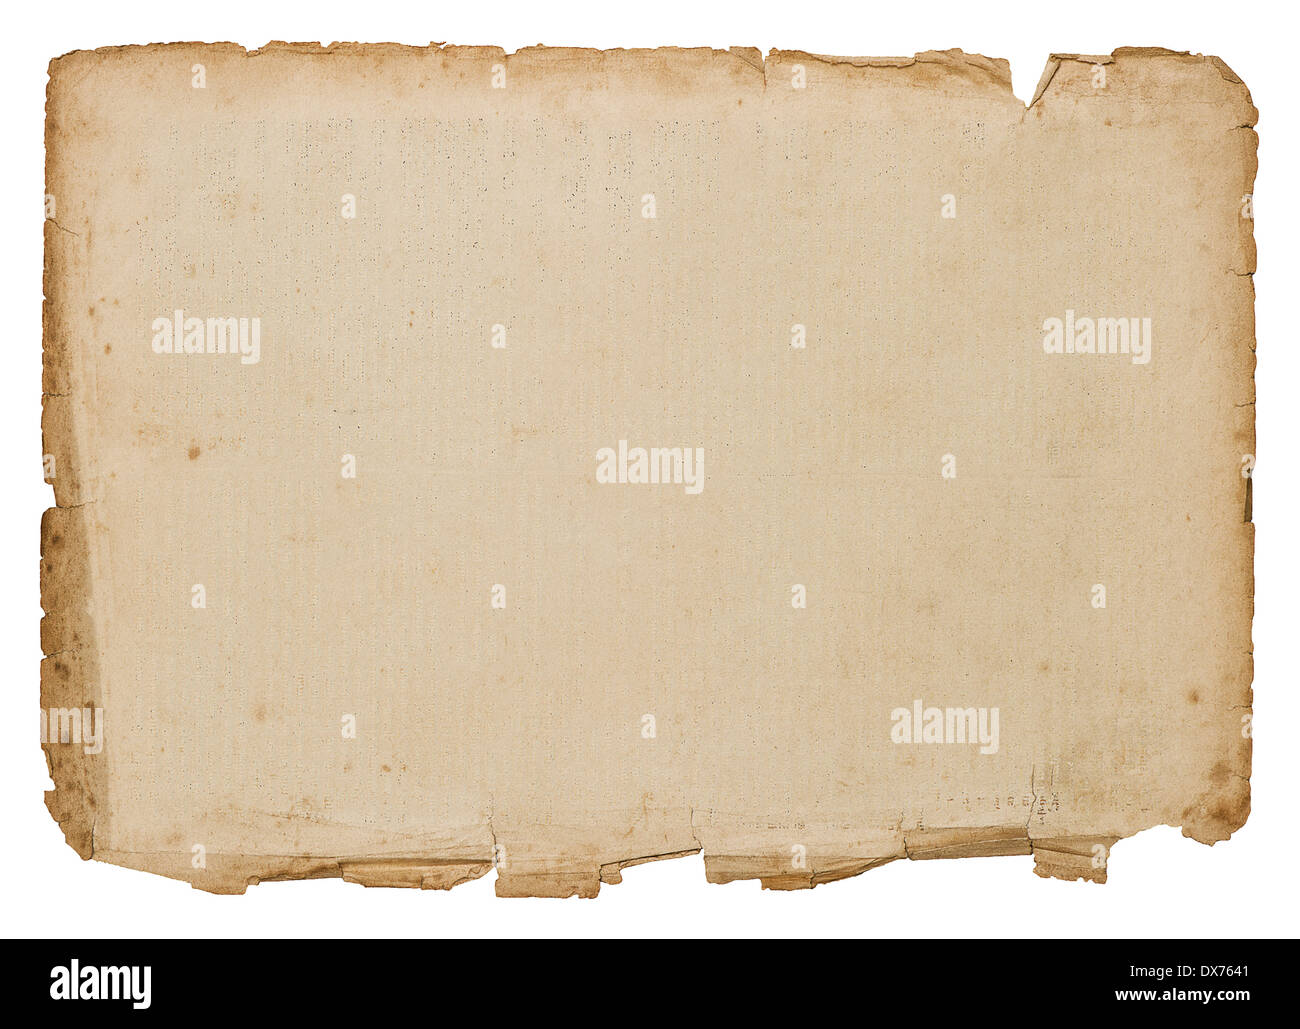 https://c8.alamy.com/comp/DX7641/antique-book-page-isolated-on-white-background-old-paper-sheet-DX7641.jpg